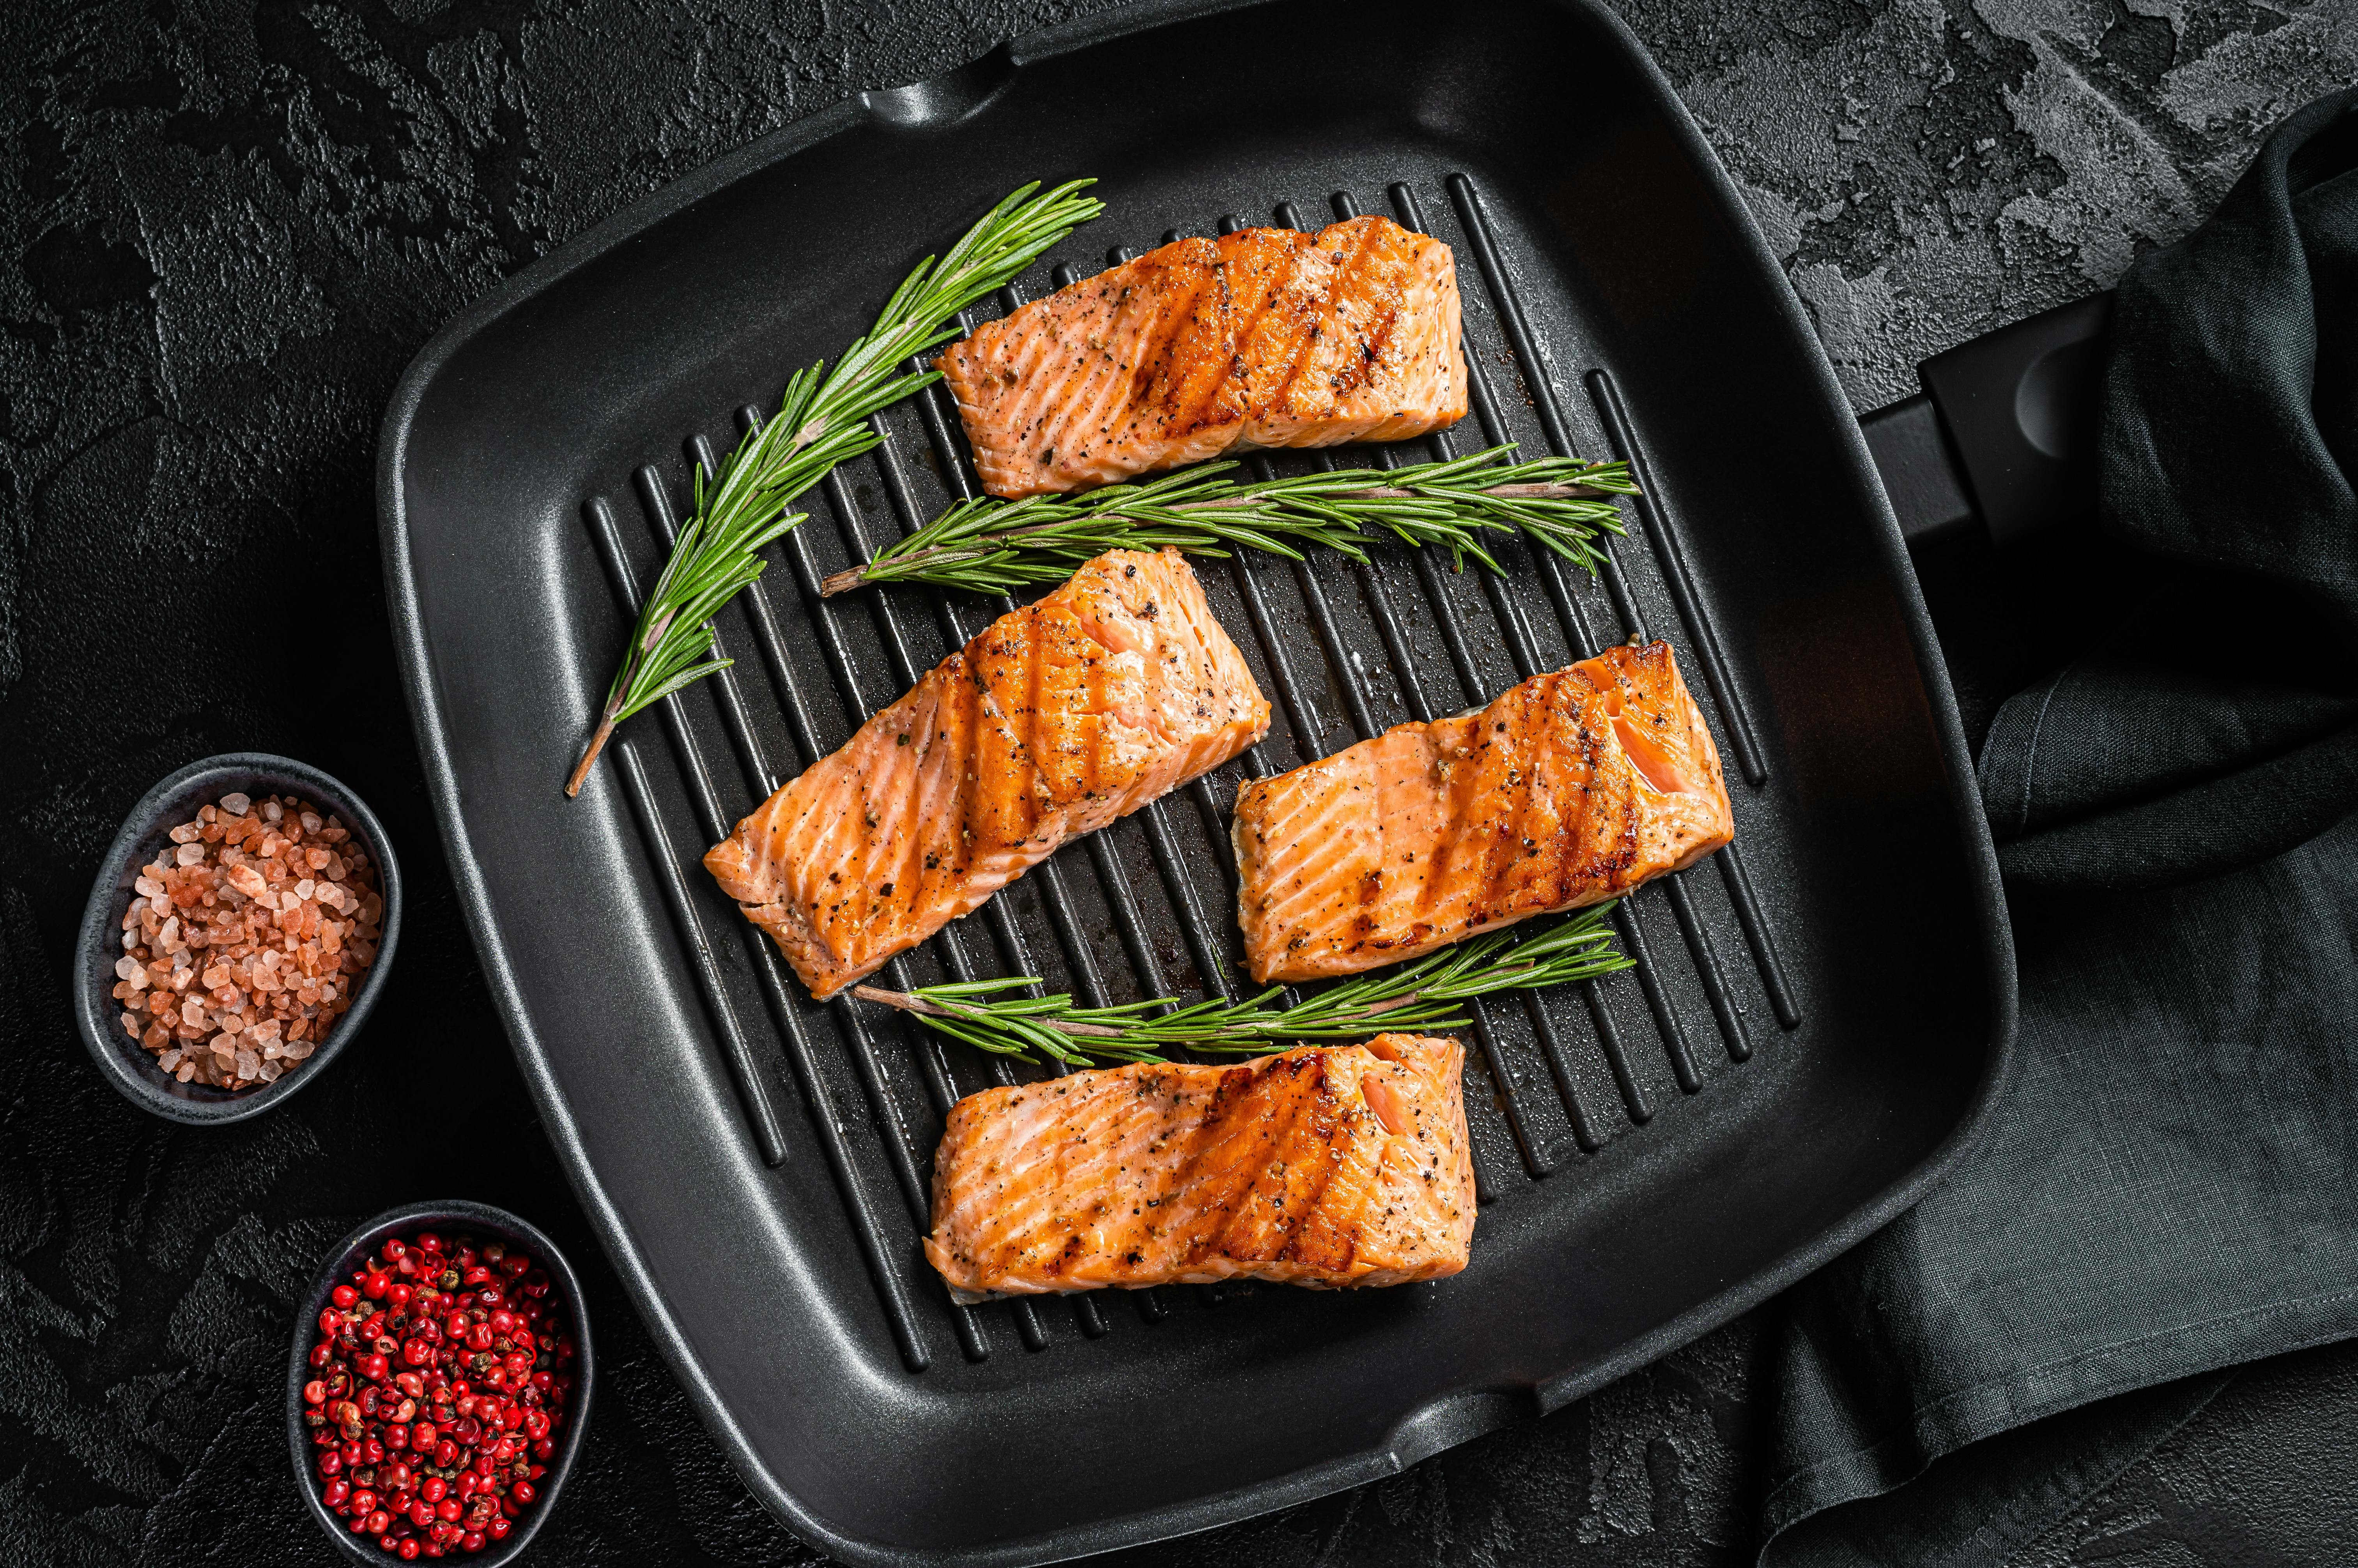 Order an Indoor Griddle Pan with Low Sides, Buy the PROFESSIONAL Square Nonstick  Griddle at SCANPAN USA